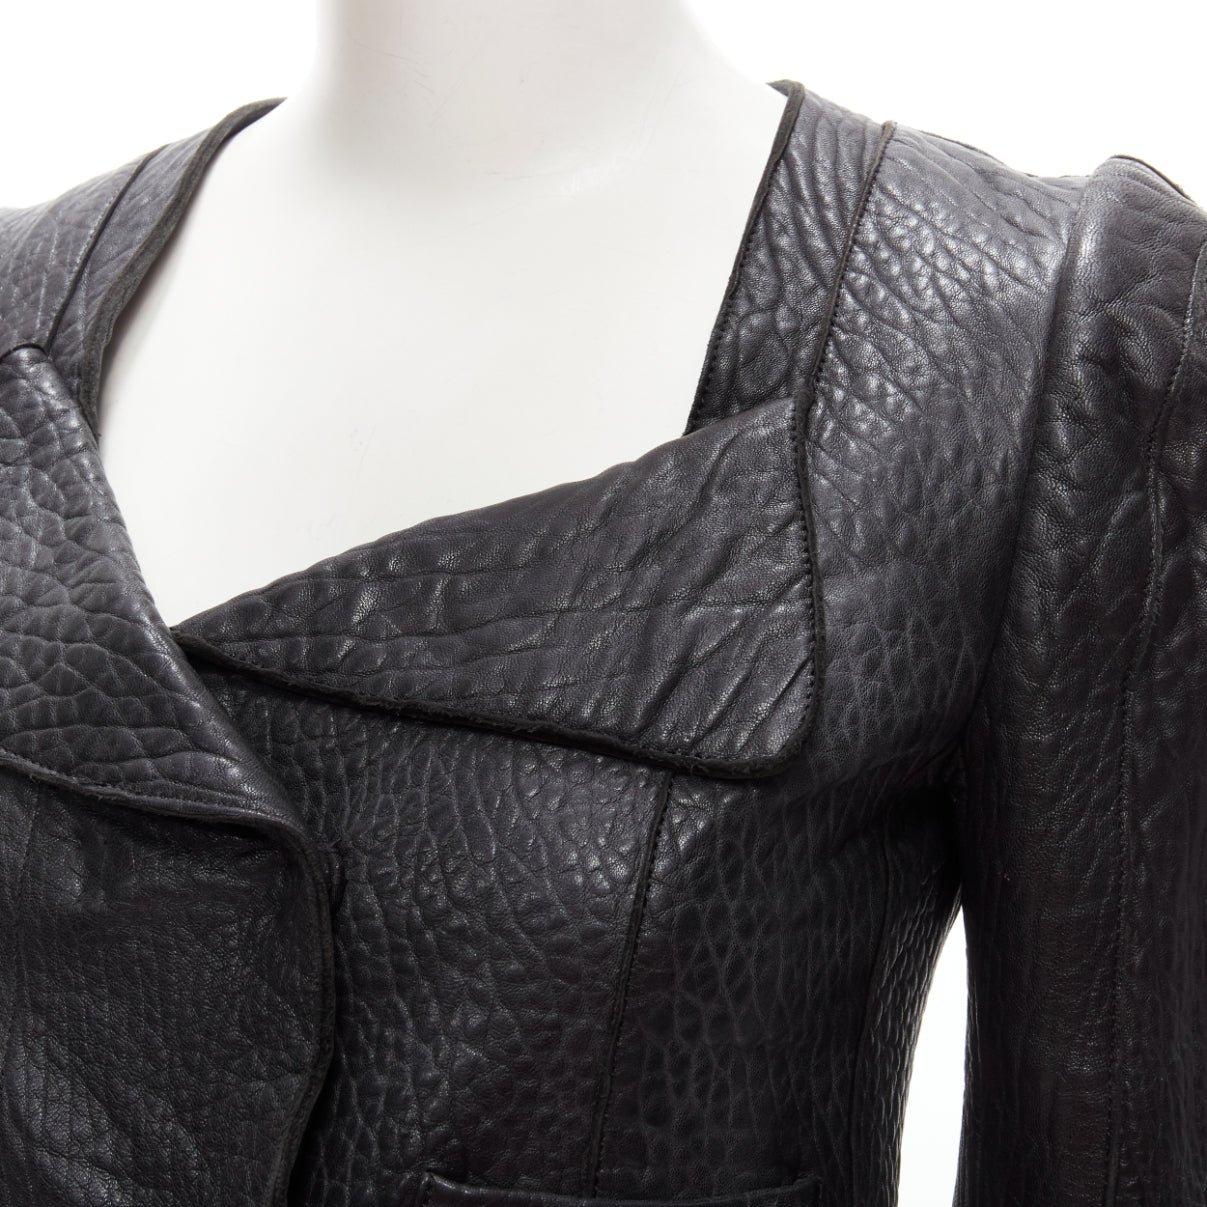 CARVEN black textured leather padded shoulder double breasted blazer IT38 XS
Reference: ANWU/A00758
Brand: Carven
Designer: Guillaume Henry
Material: Leather
Color: Black
Pattern: Solid
Closure: Snap Buttons
Extra Details: Croc pattern pebble